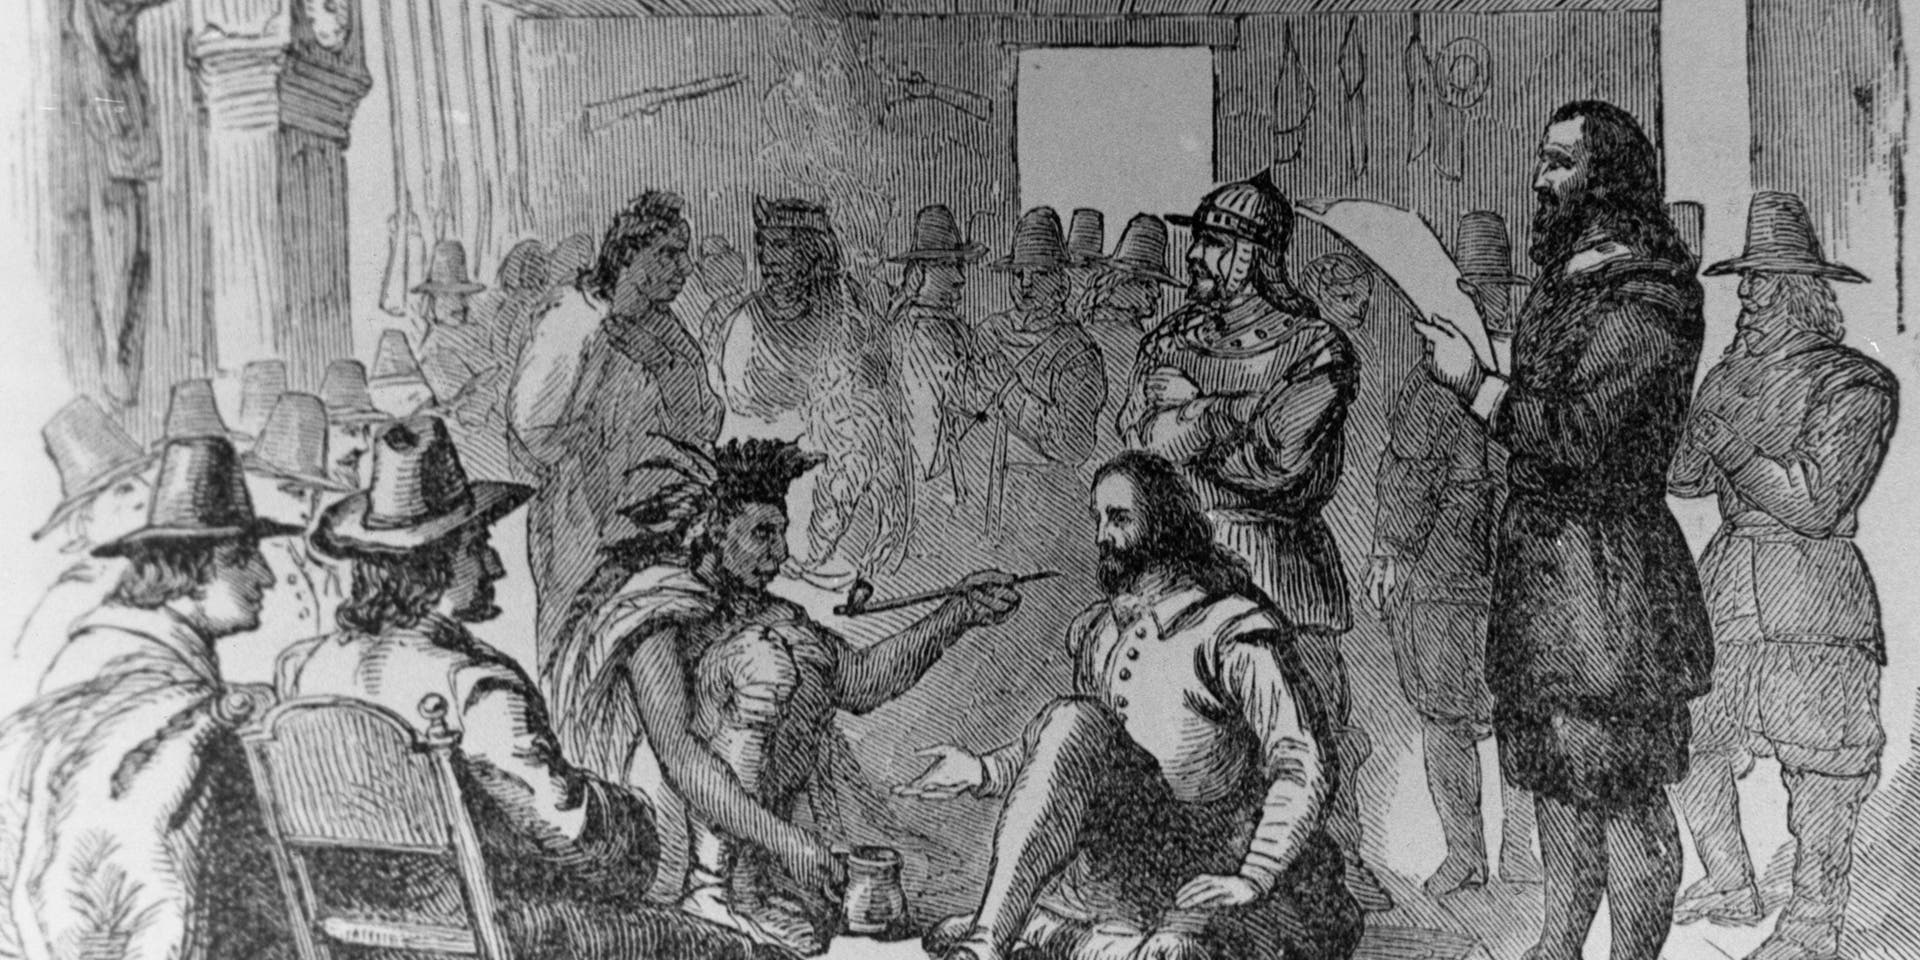 Ousamequin, chief of the Wampanoag signs a peace treaty with Governor John Carver (1576 - 1621).